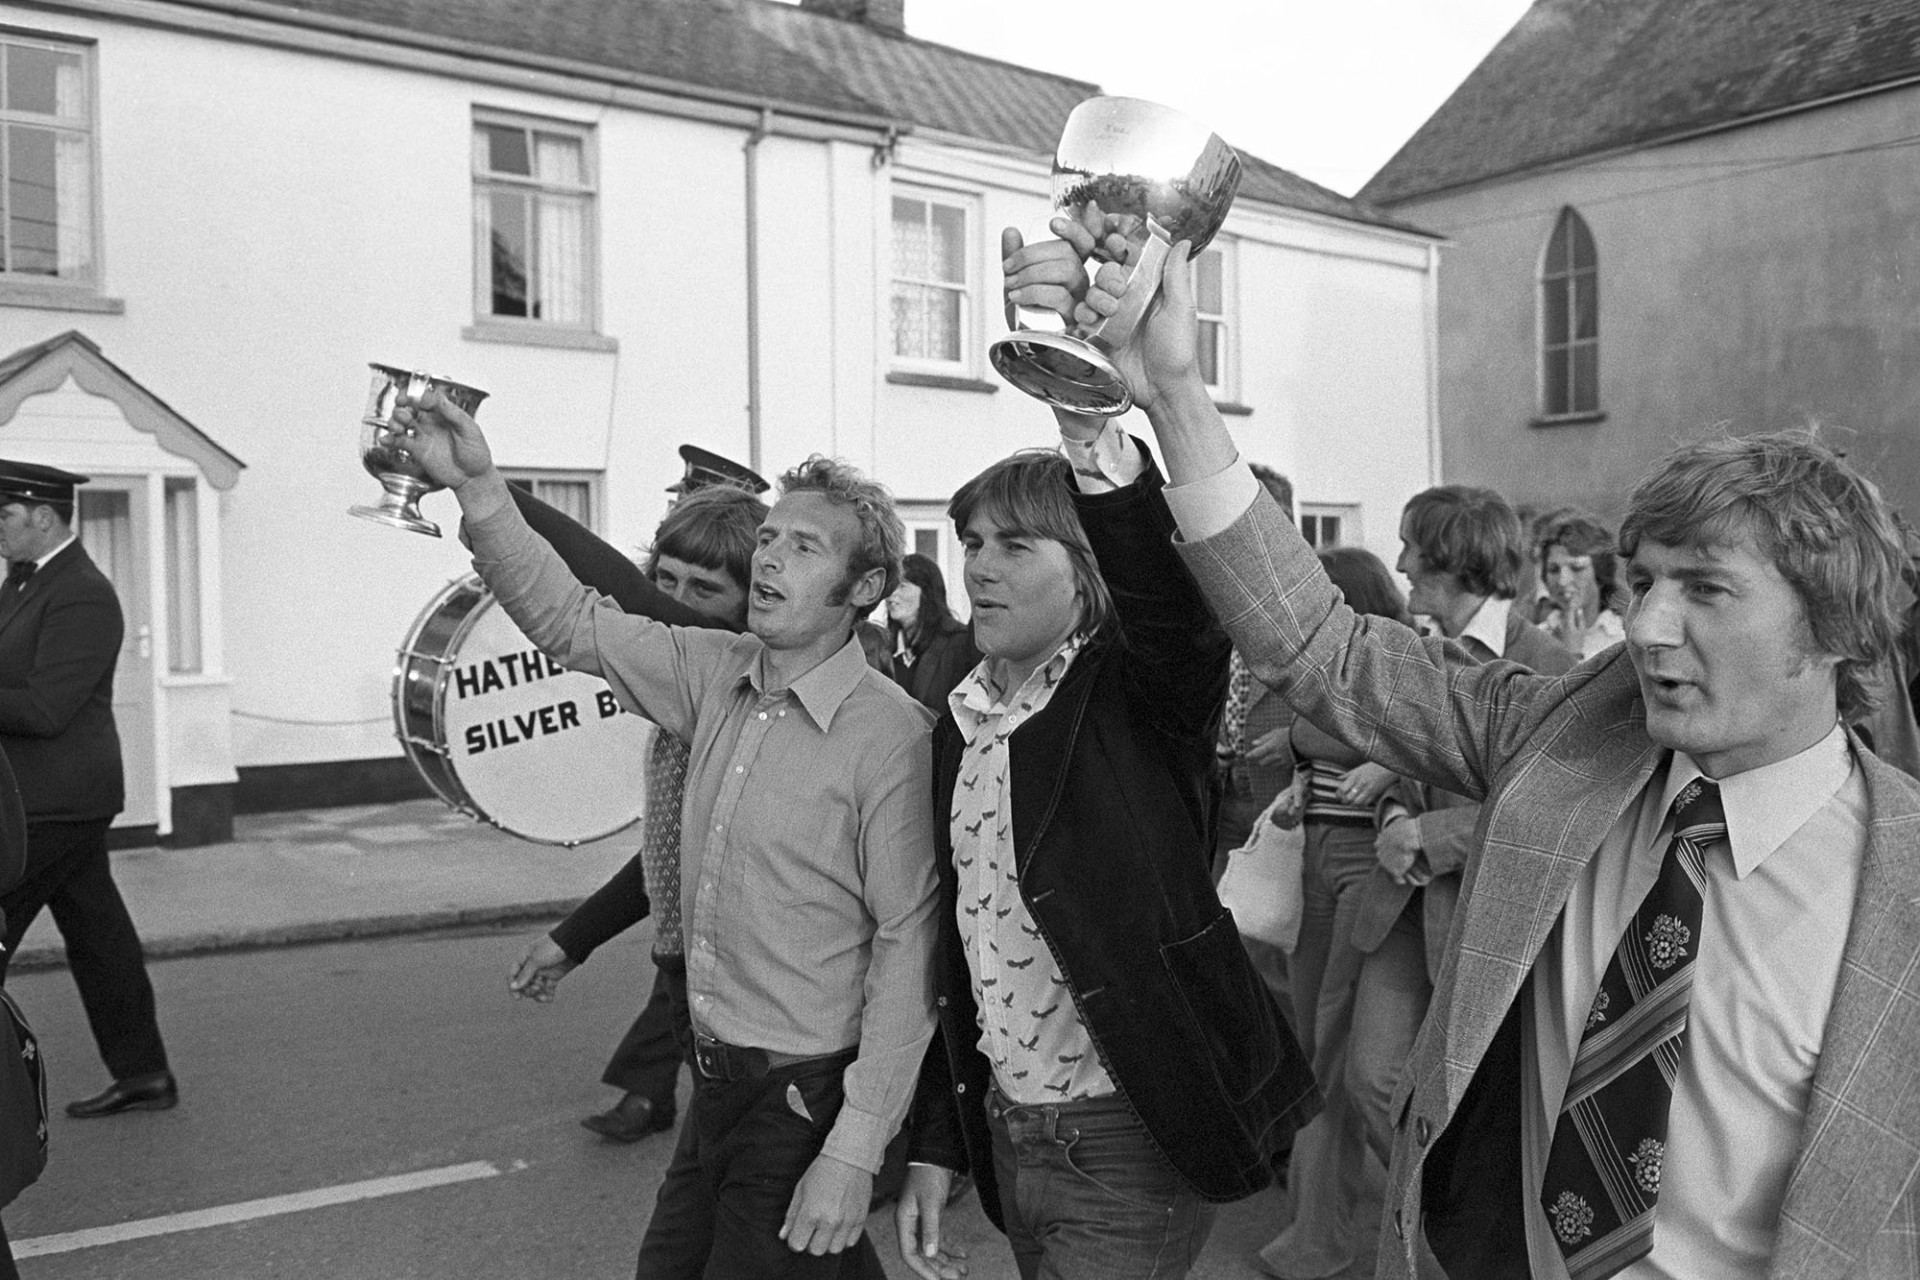 Victory parade with town band to celebrate winning football cup.
[Men parading through a street in Hatherleigh holding aloft silver cups from winning the football cup, with the Hatherleigh Silver Band marching alongside.]